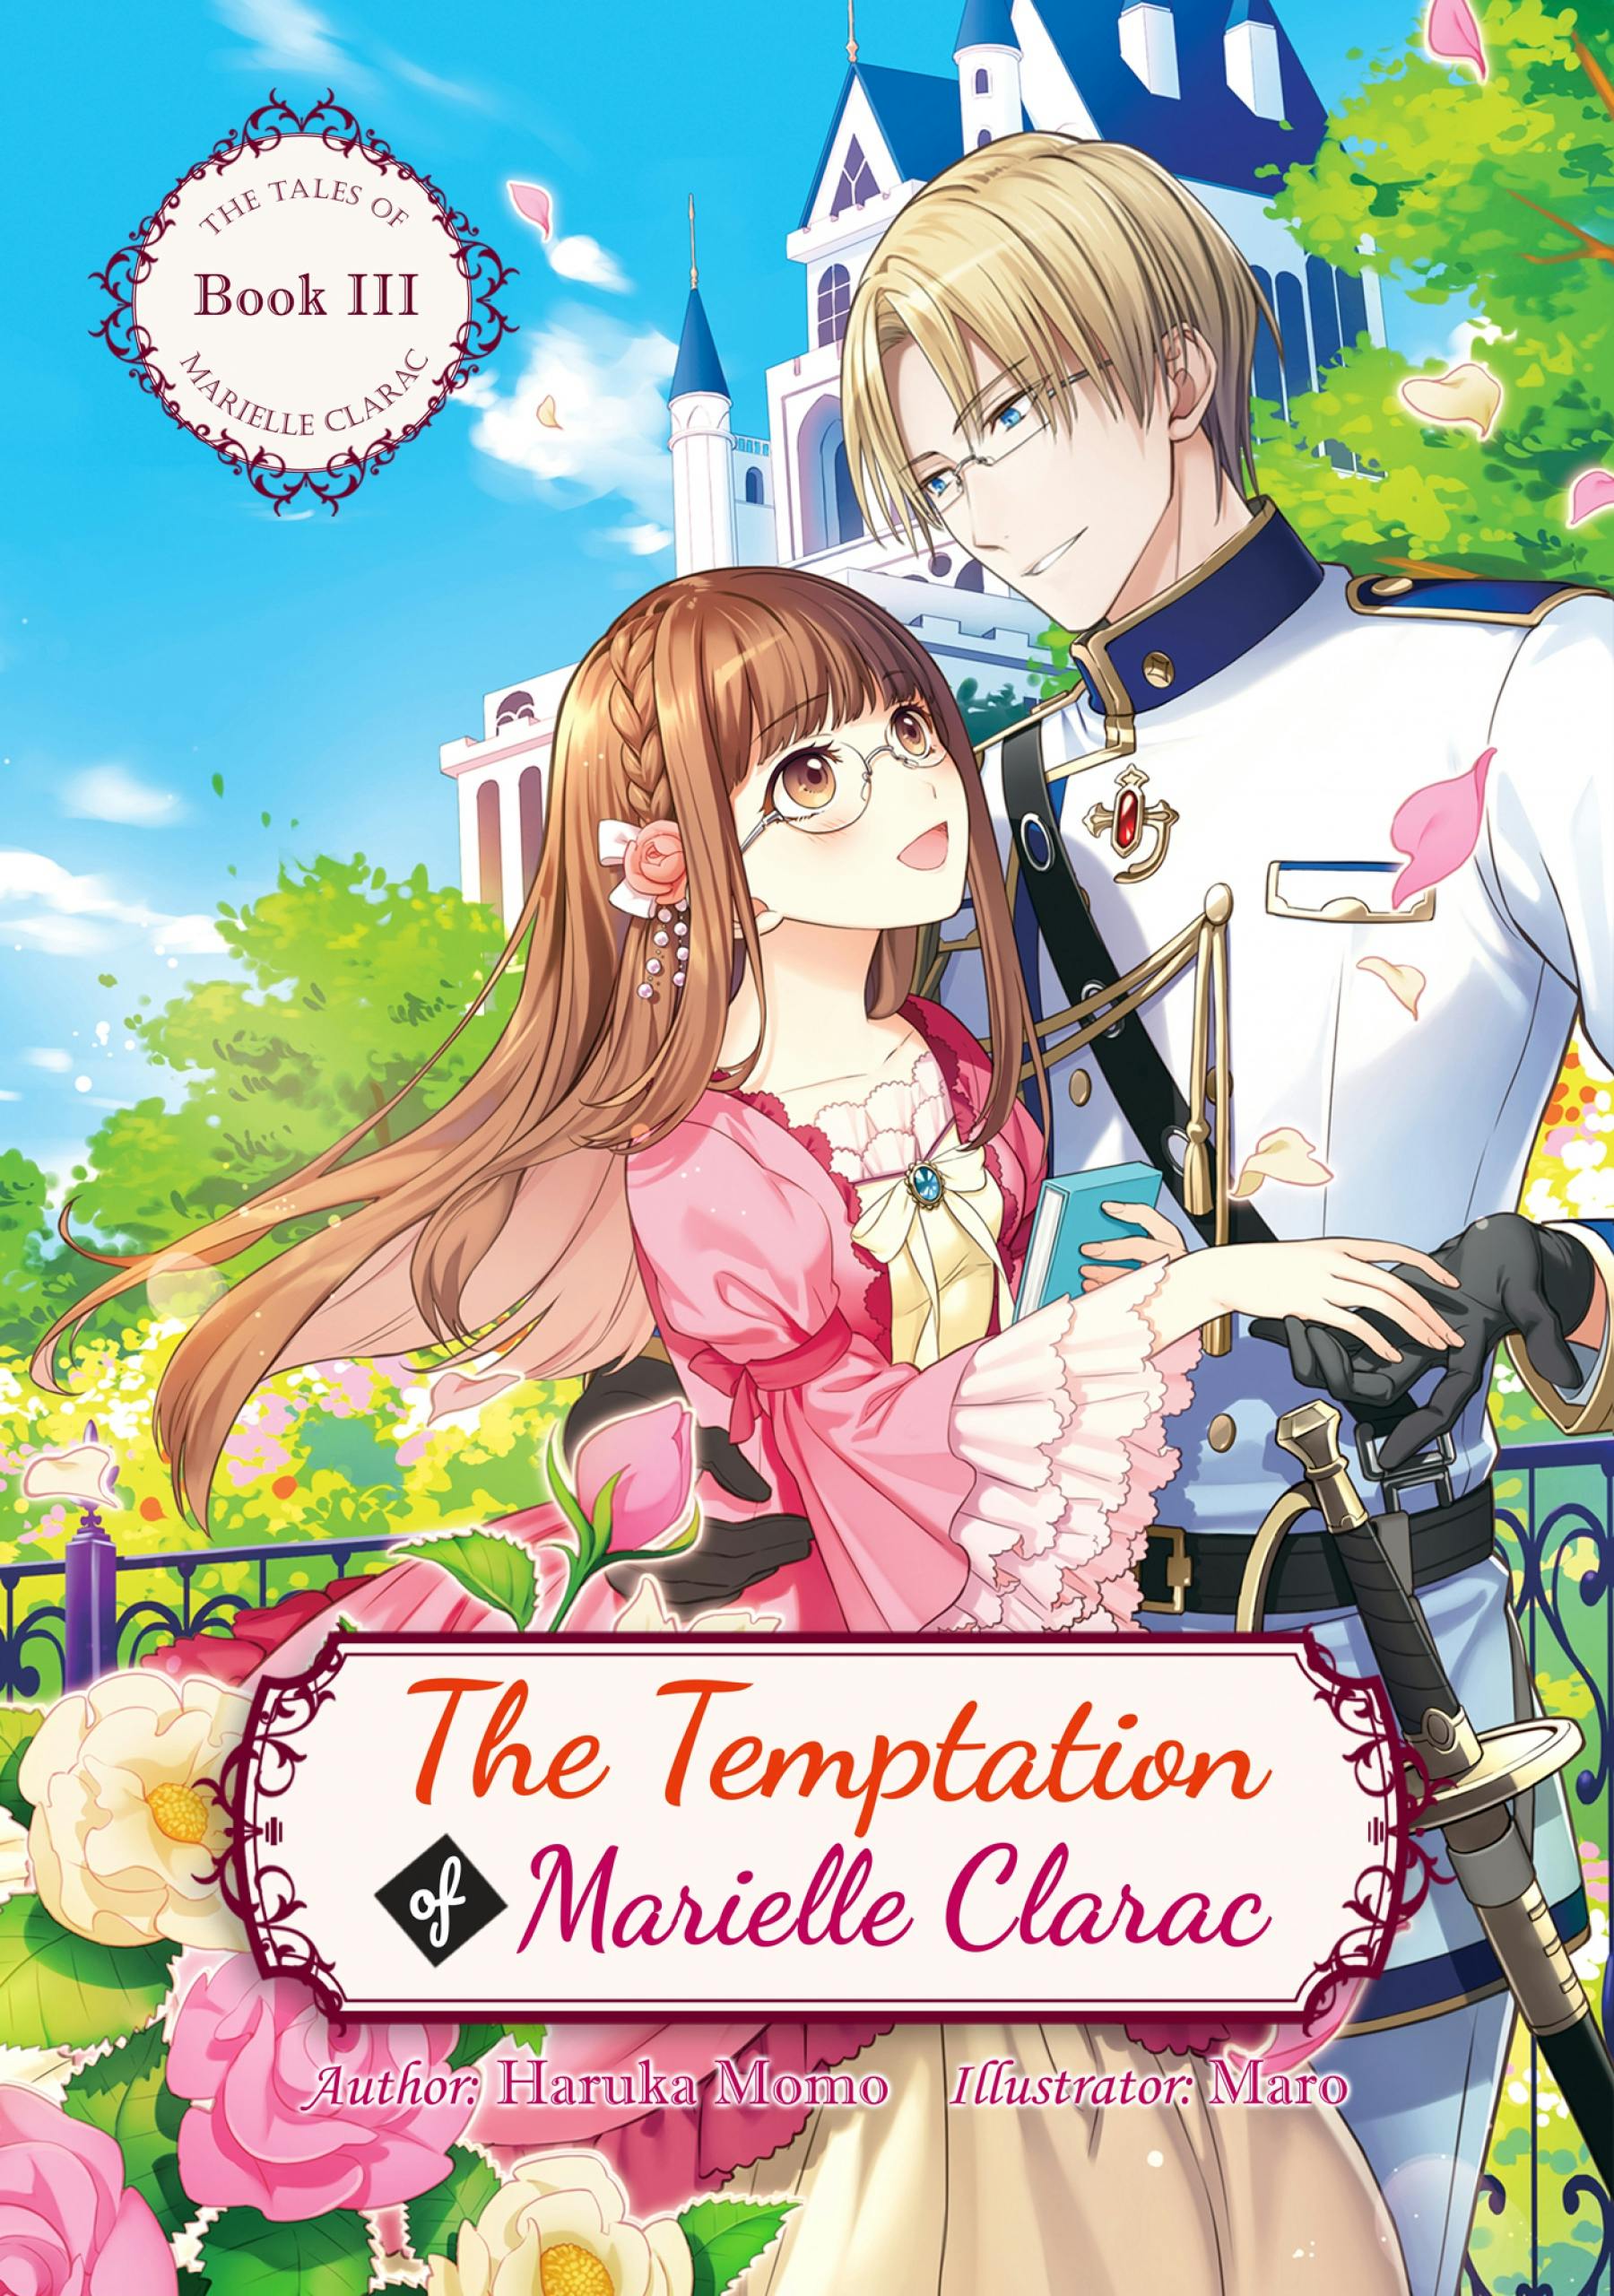 The Temptation of Marielle Clarac - undefined